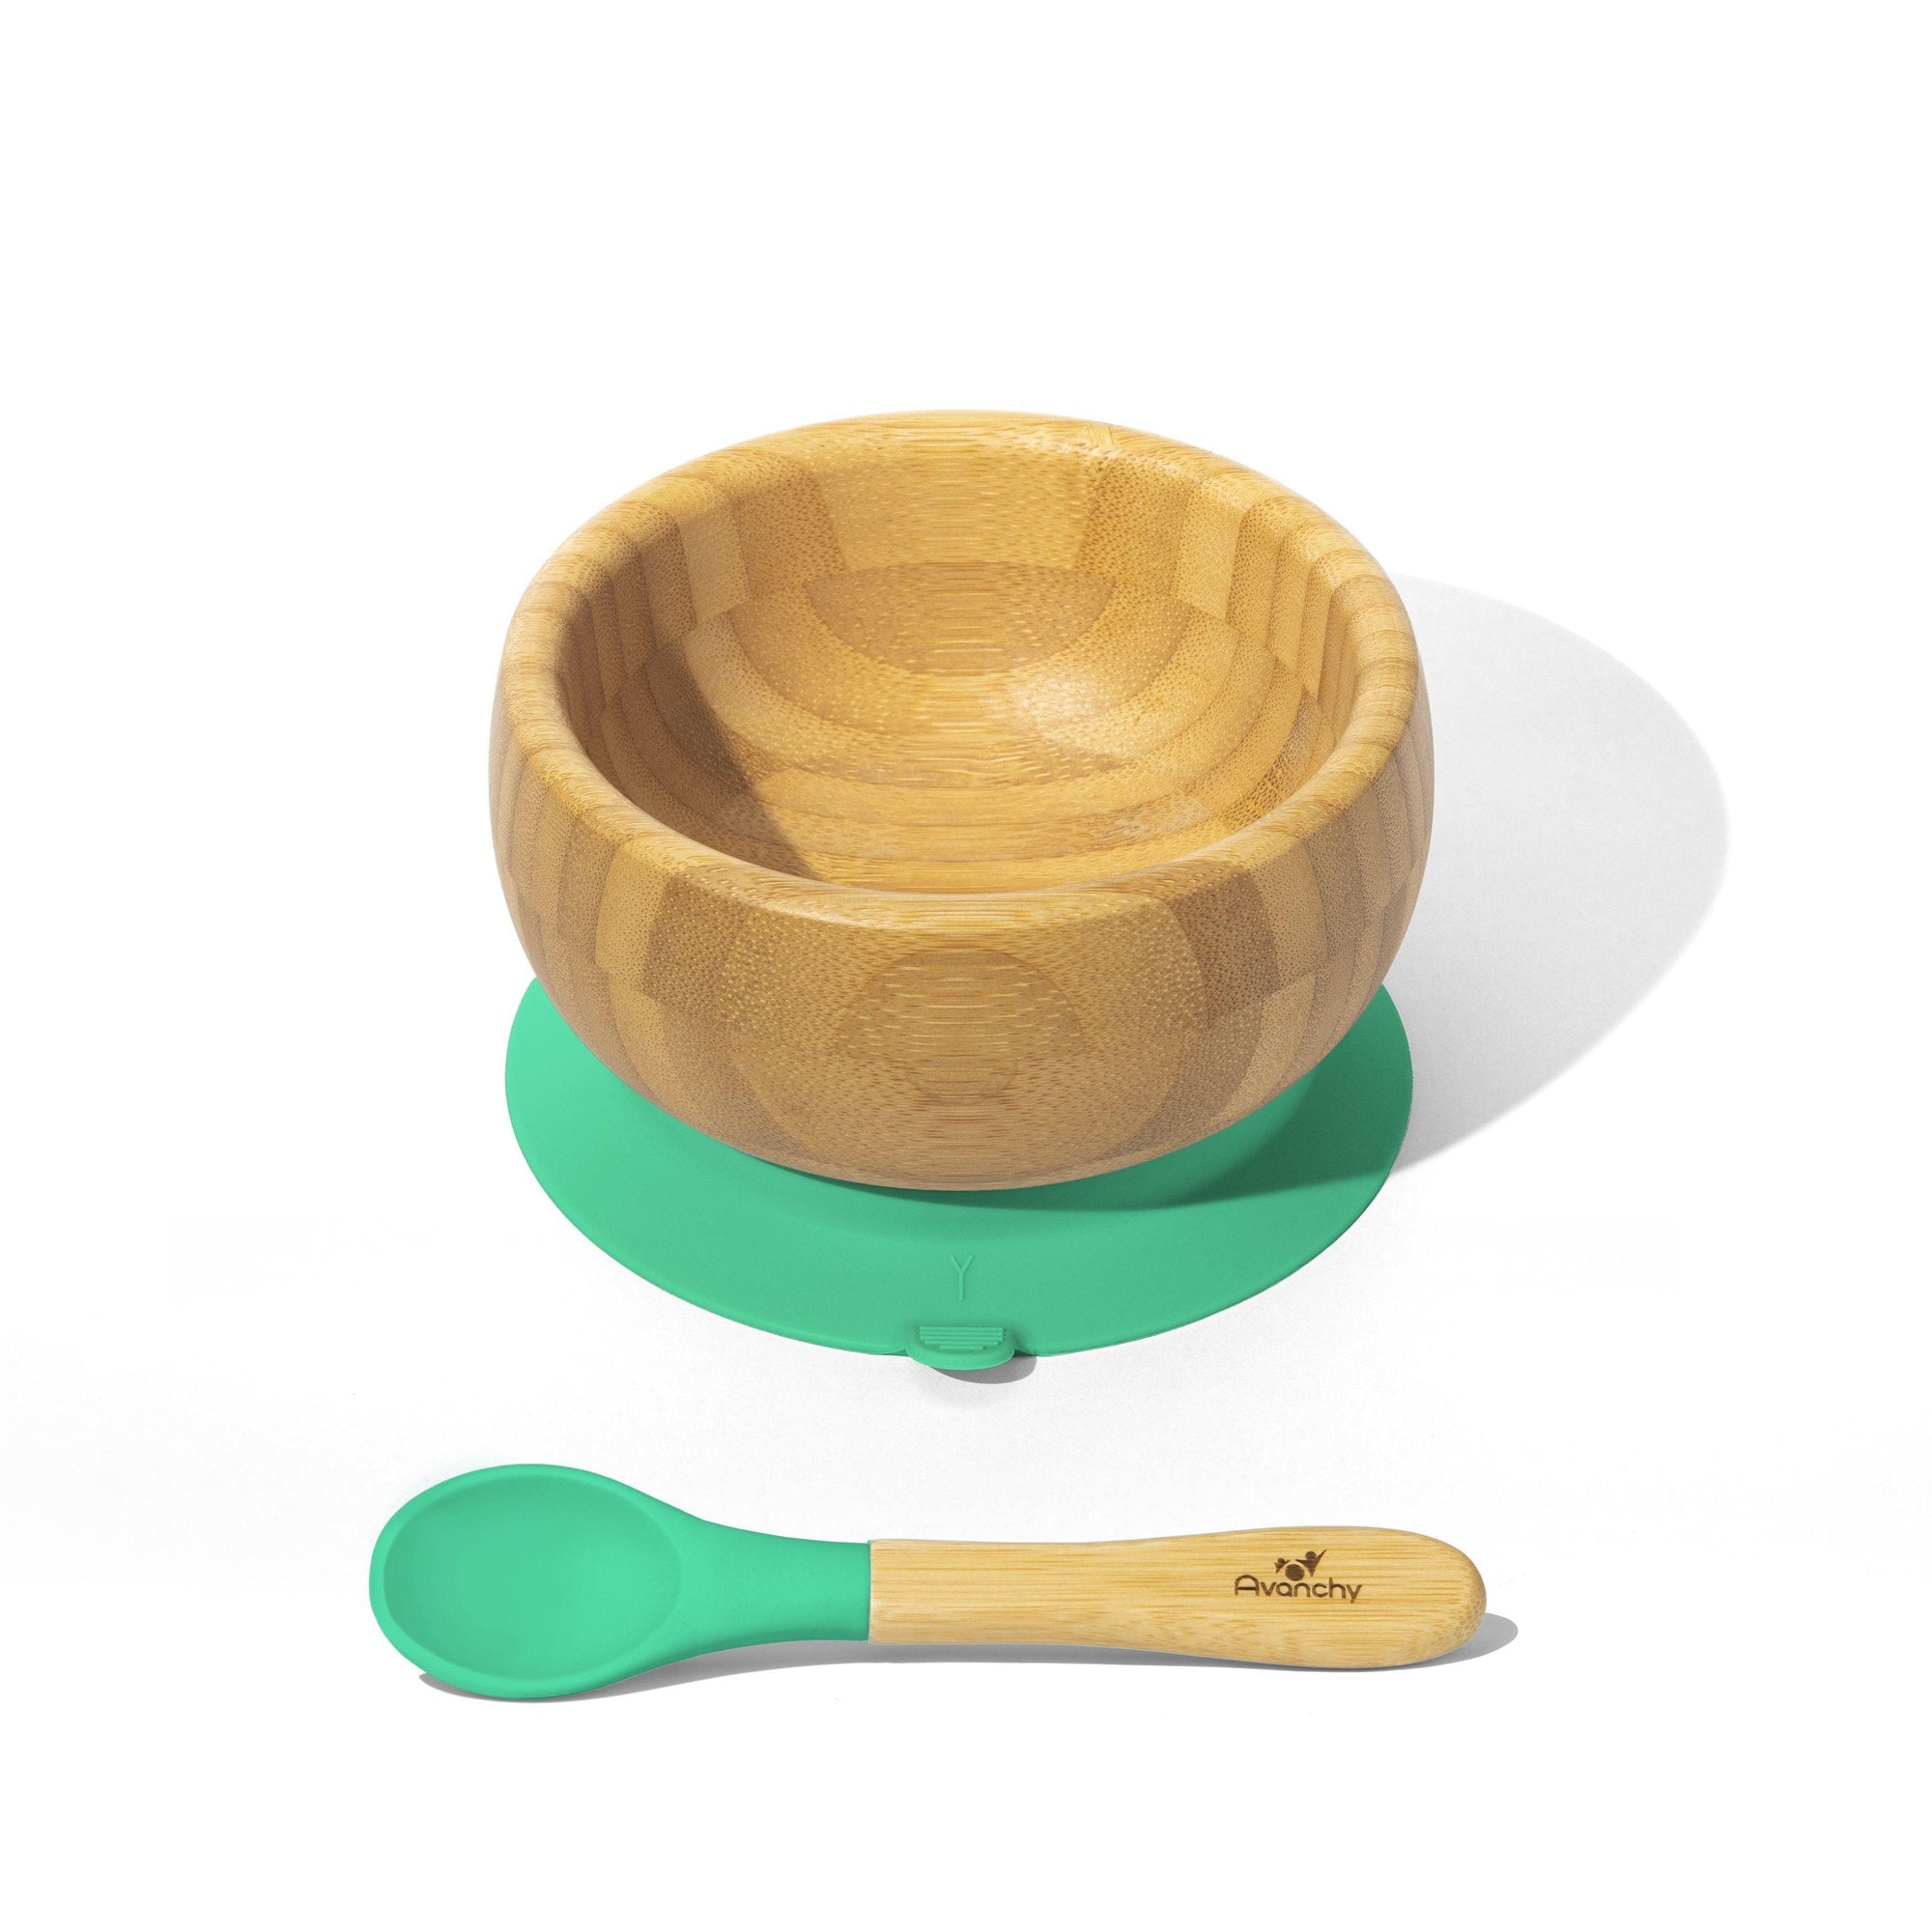  Nutrichef Baby and Toddler, 3 compartment plate, bowl, cup and  spoon feeding set- silicon suction, Non-toxic all natural Bamboo baby food  plate (Star Set) : Baby